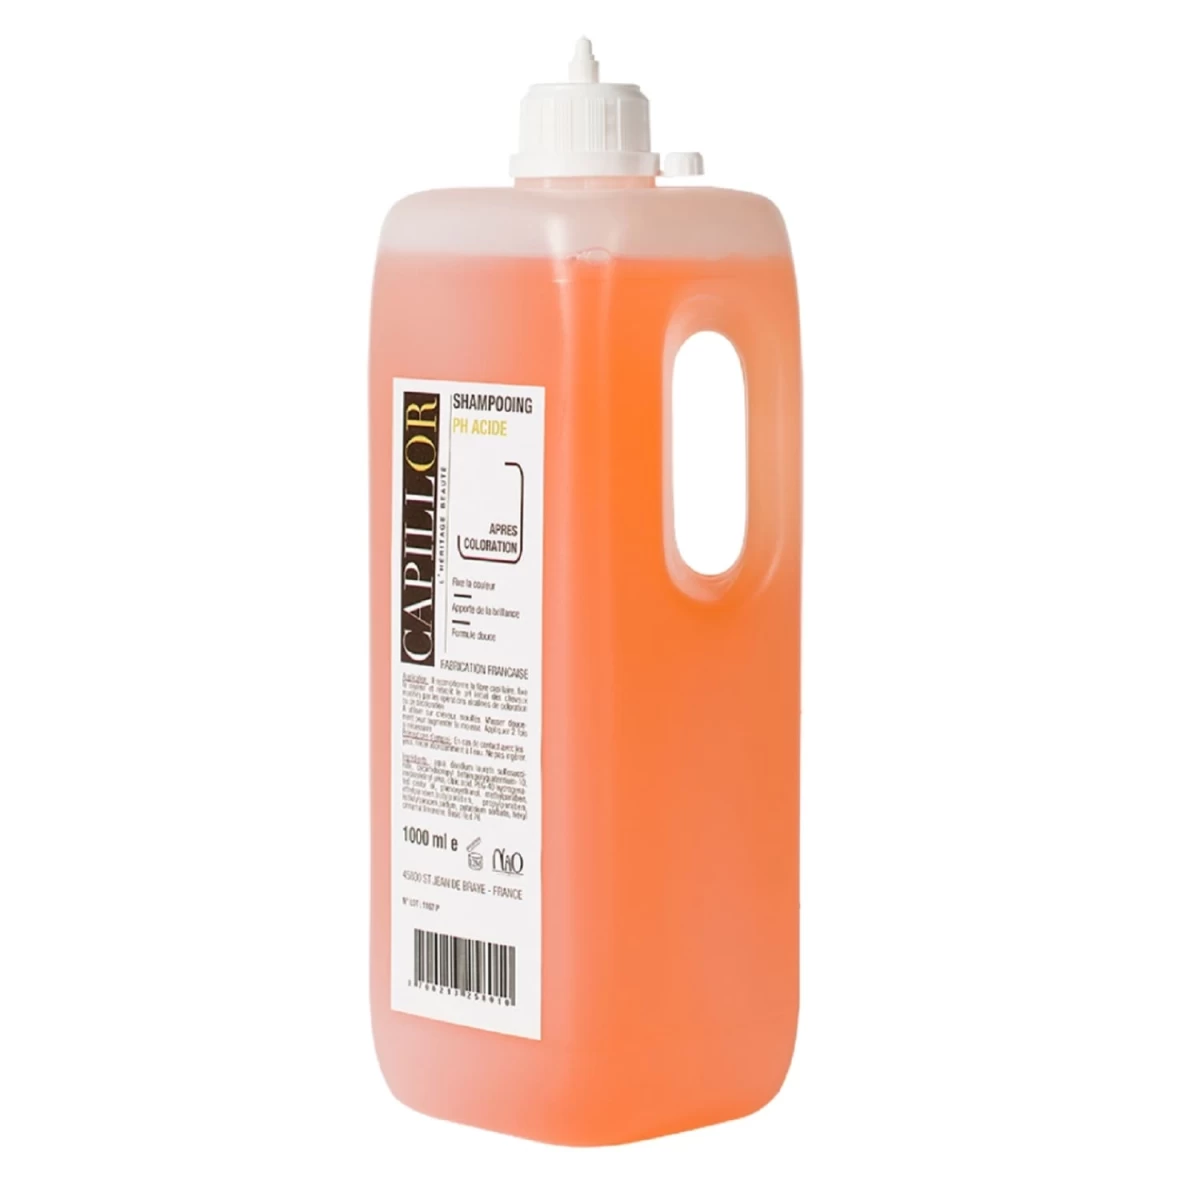 Capillor - Shampoing PH acide 1L